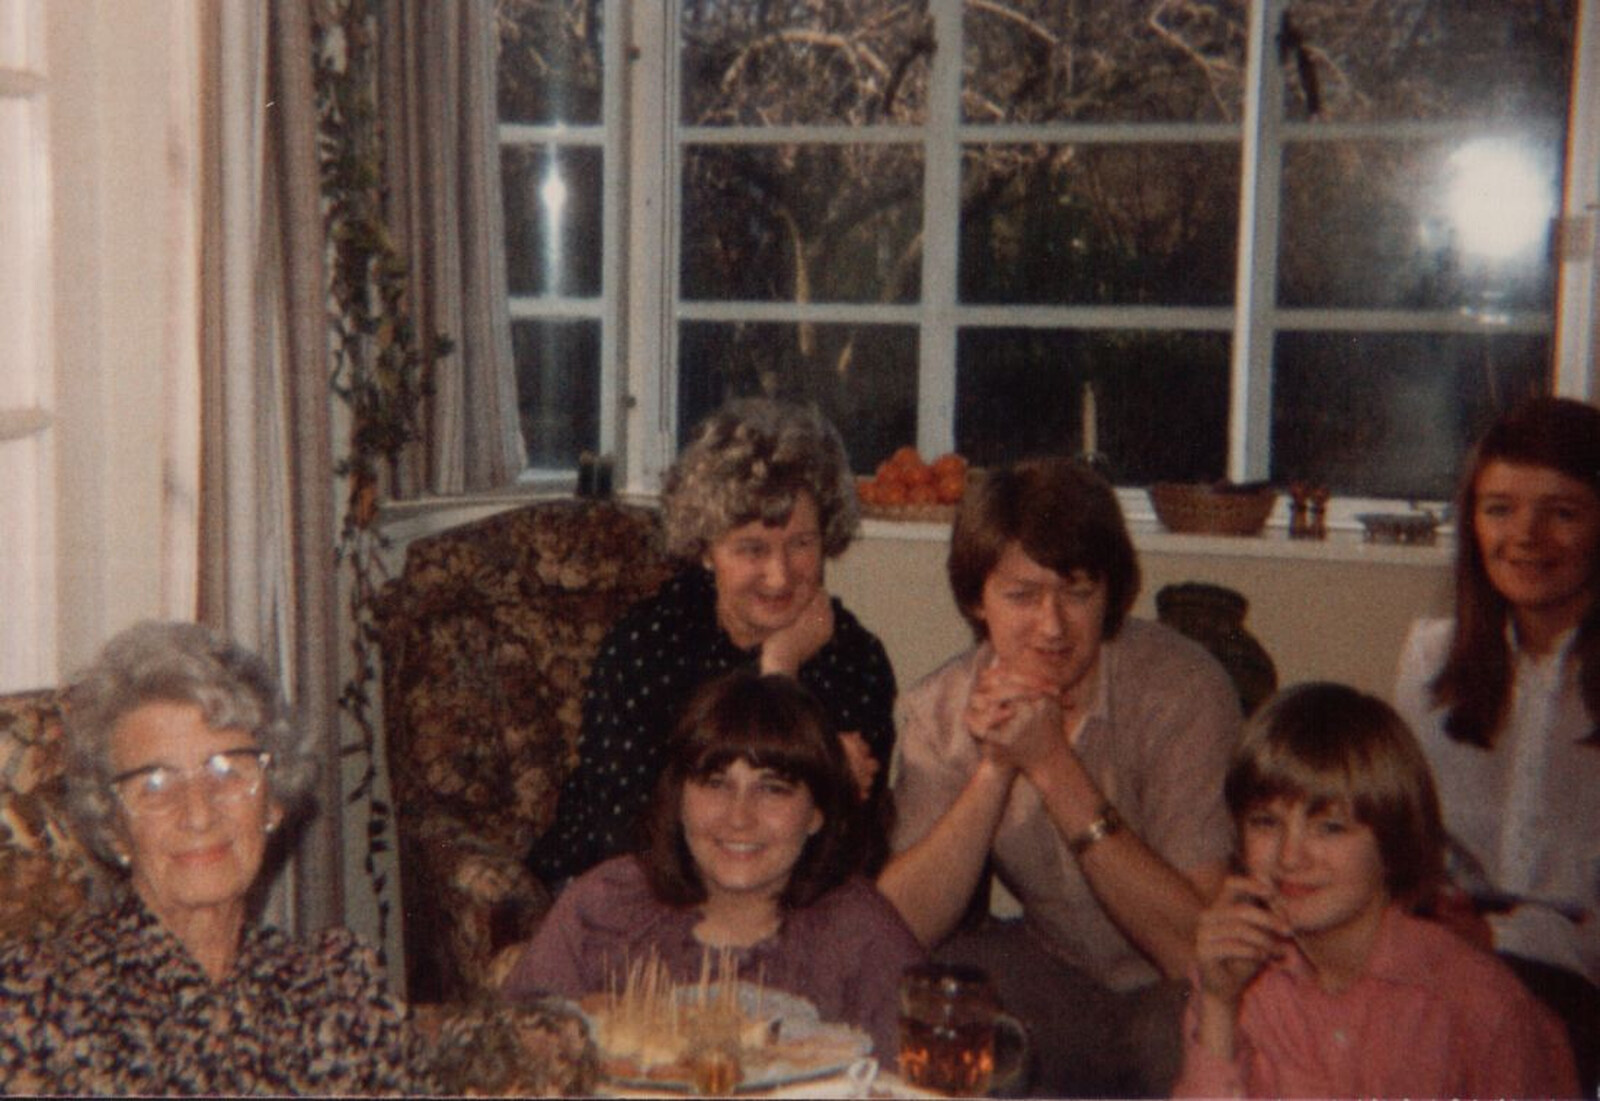 Family History: The 1980s - 24th January 2020: Granny at N&C's for Christmas